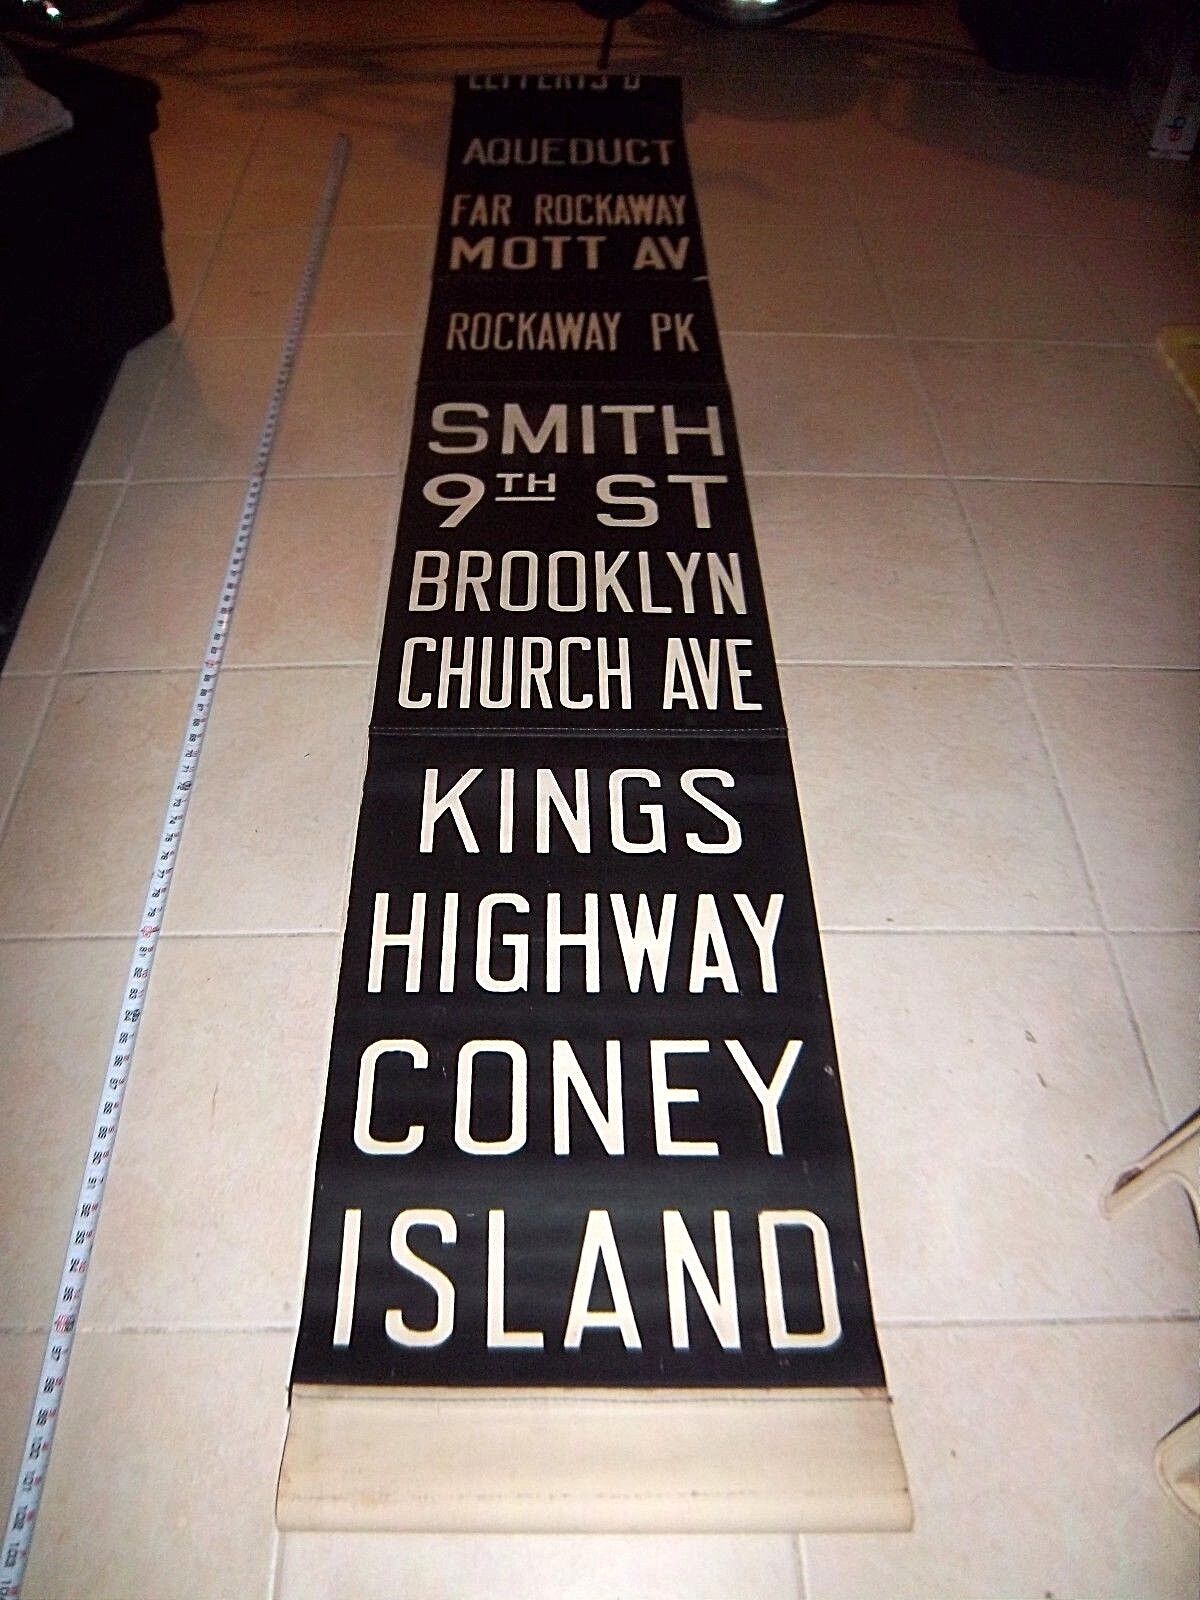 30 FT. NY NYC SUBWAY ROLL SIGN CONEY ISLAND BROOKLYN SMITH 9 ST UNCUT HISTORICAL